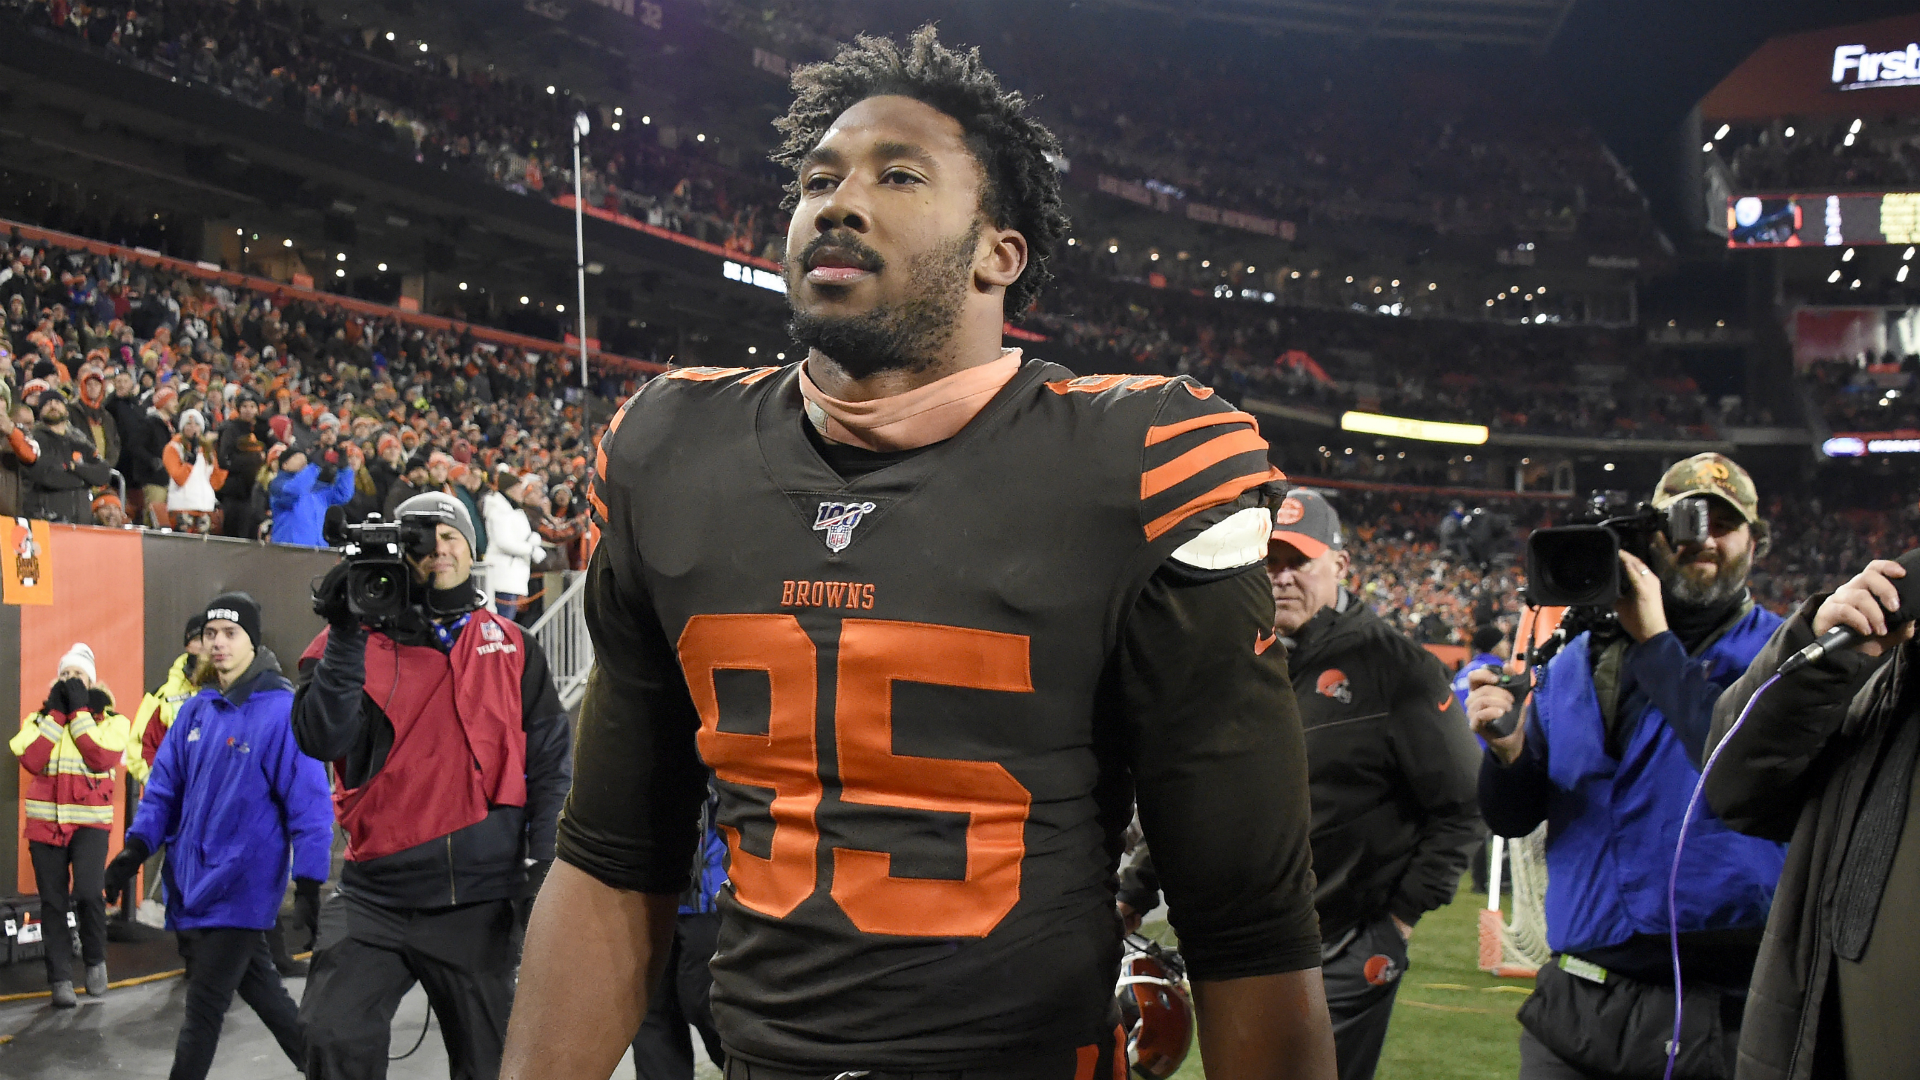 Myles Garrett discussed Thursday's shocking incident, which saw him hit Mason Rudolph with a helmet.